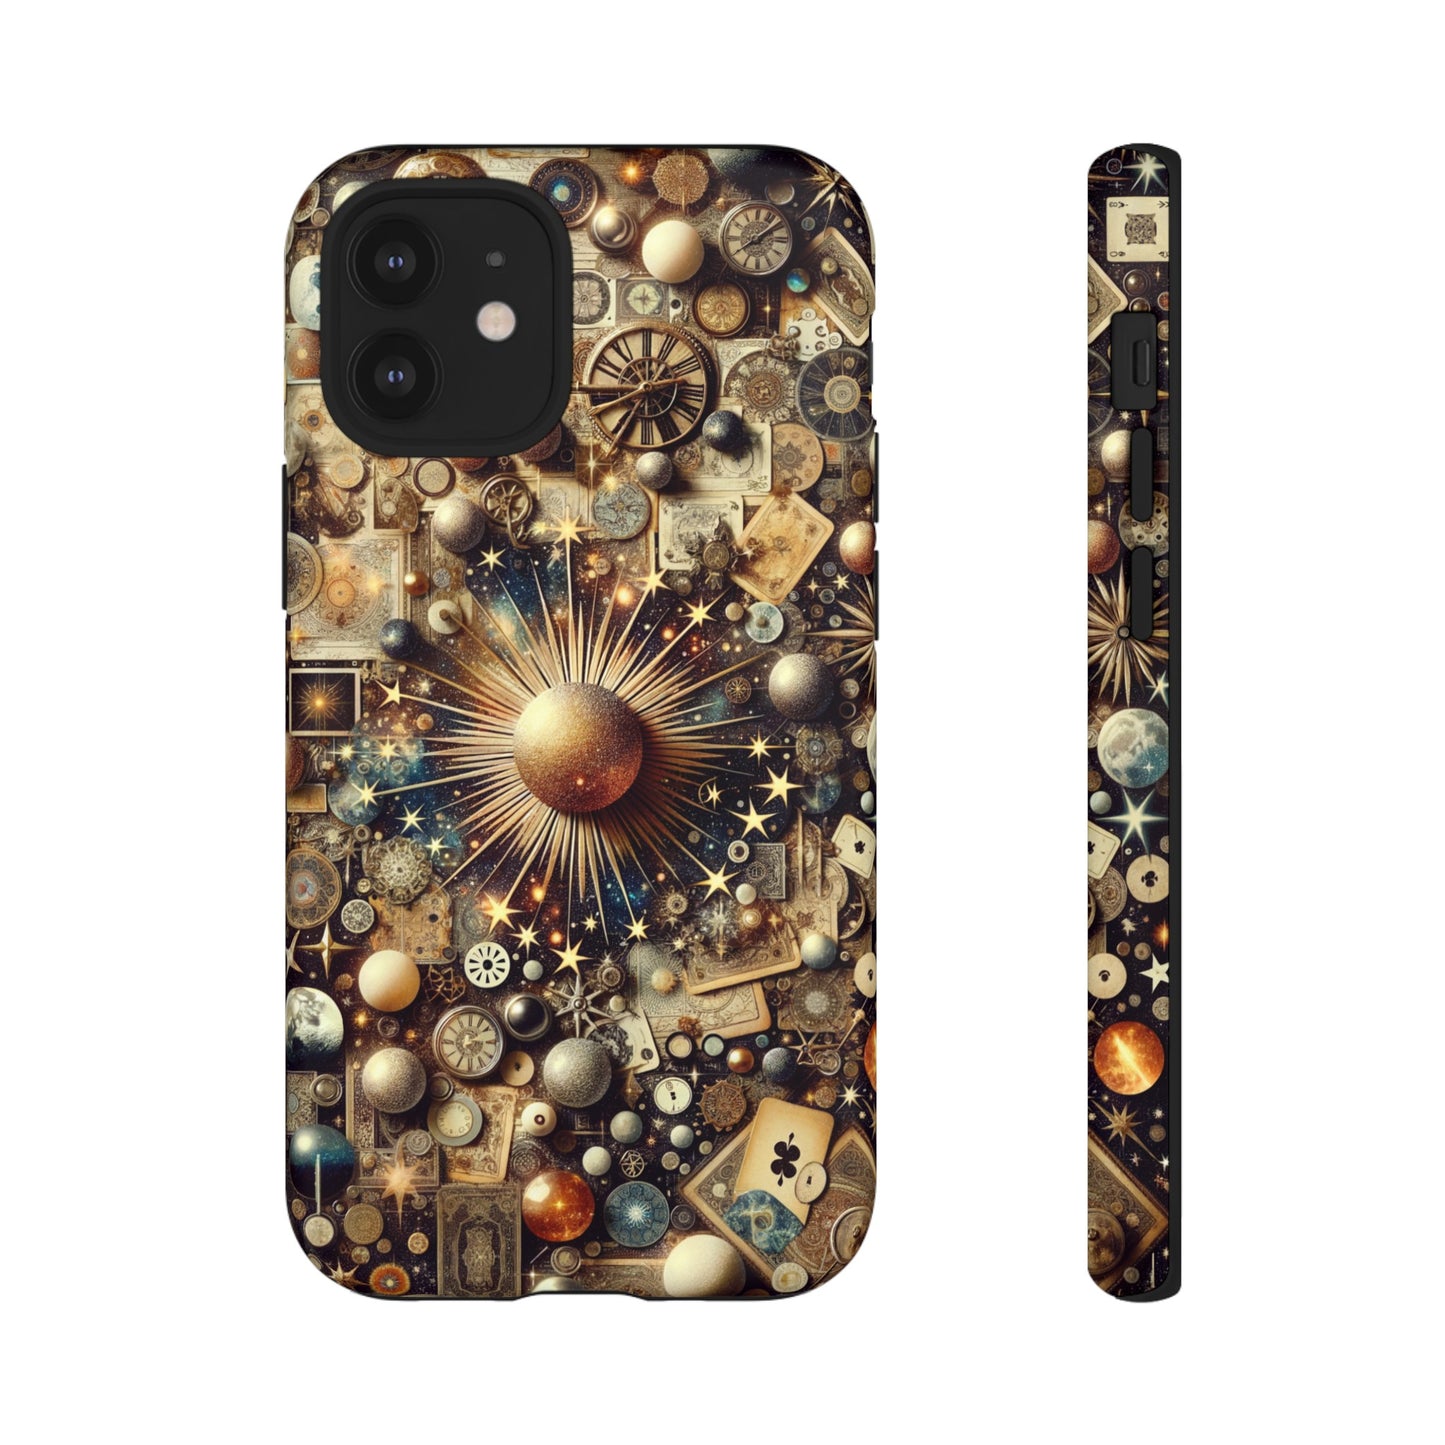 Celestial Collage Phone Case with Suns Stars Moons Cards Keys and Trinkets- Phone Case